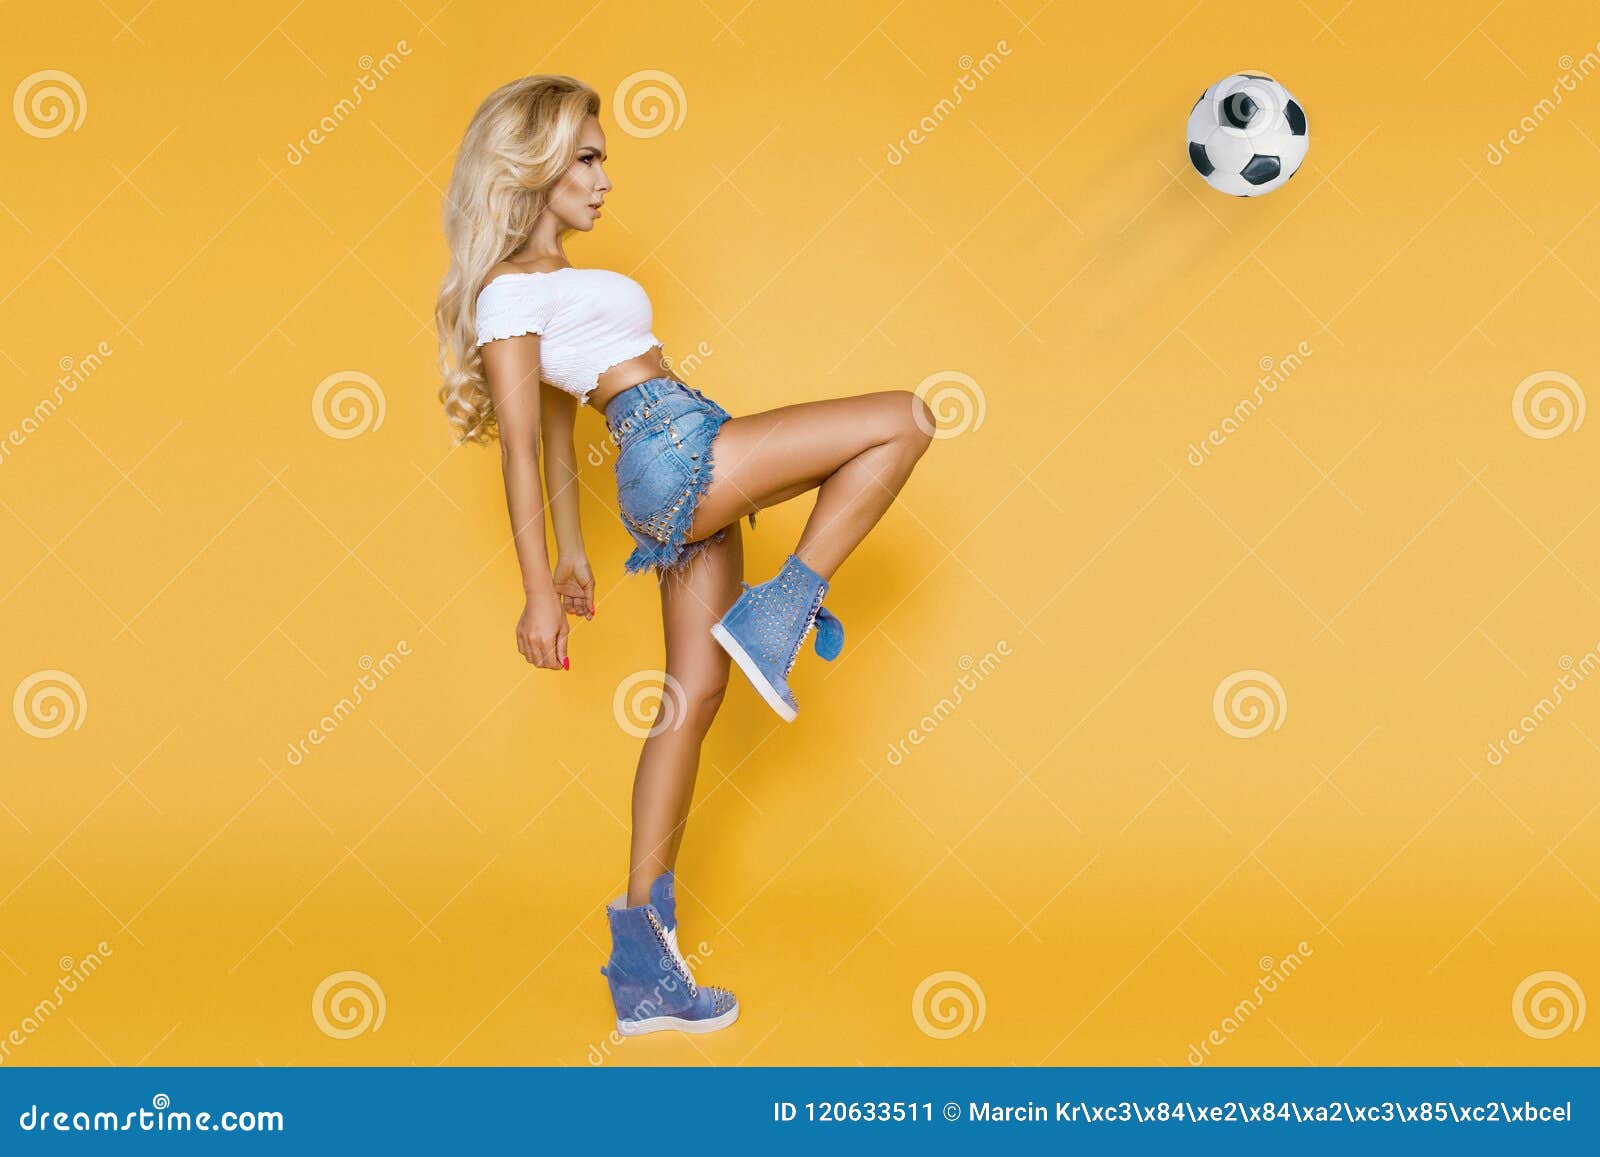 Beautiful Blond Woman Dressed In Sports Clothing Playing Football Stock Image Image Of